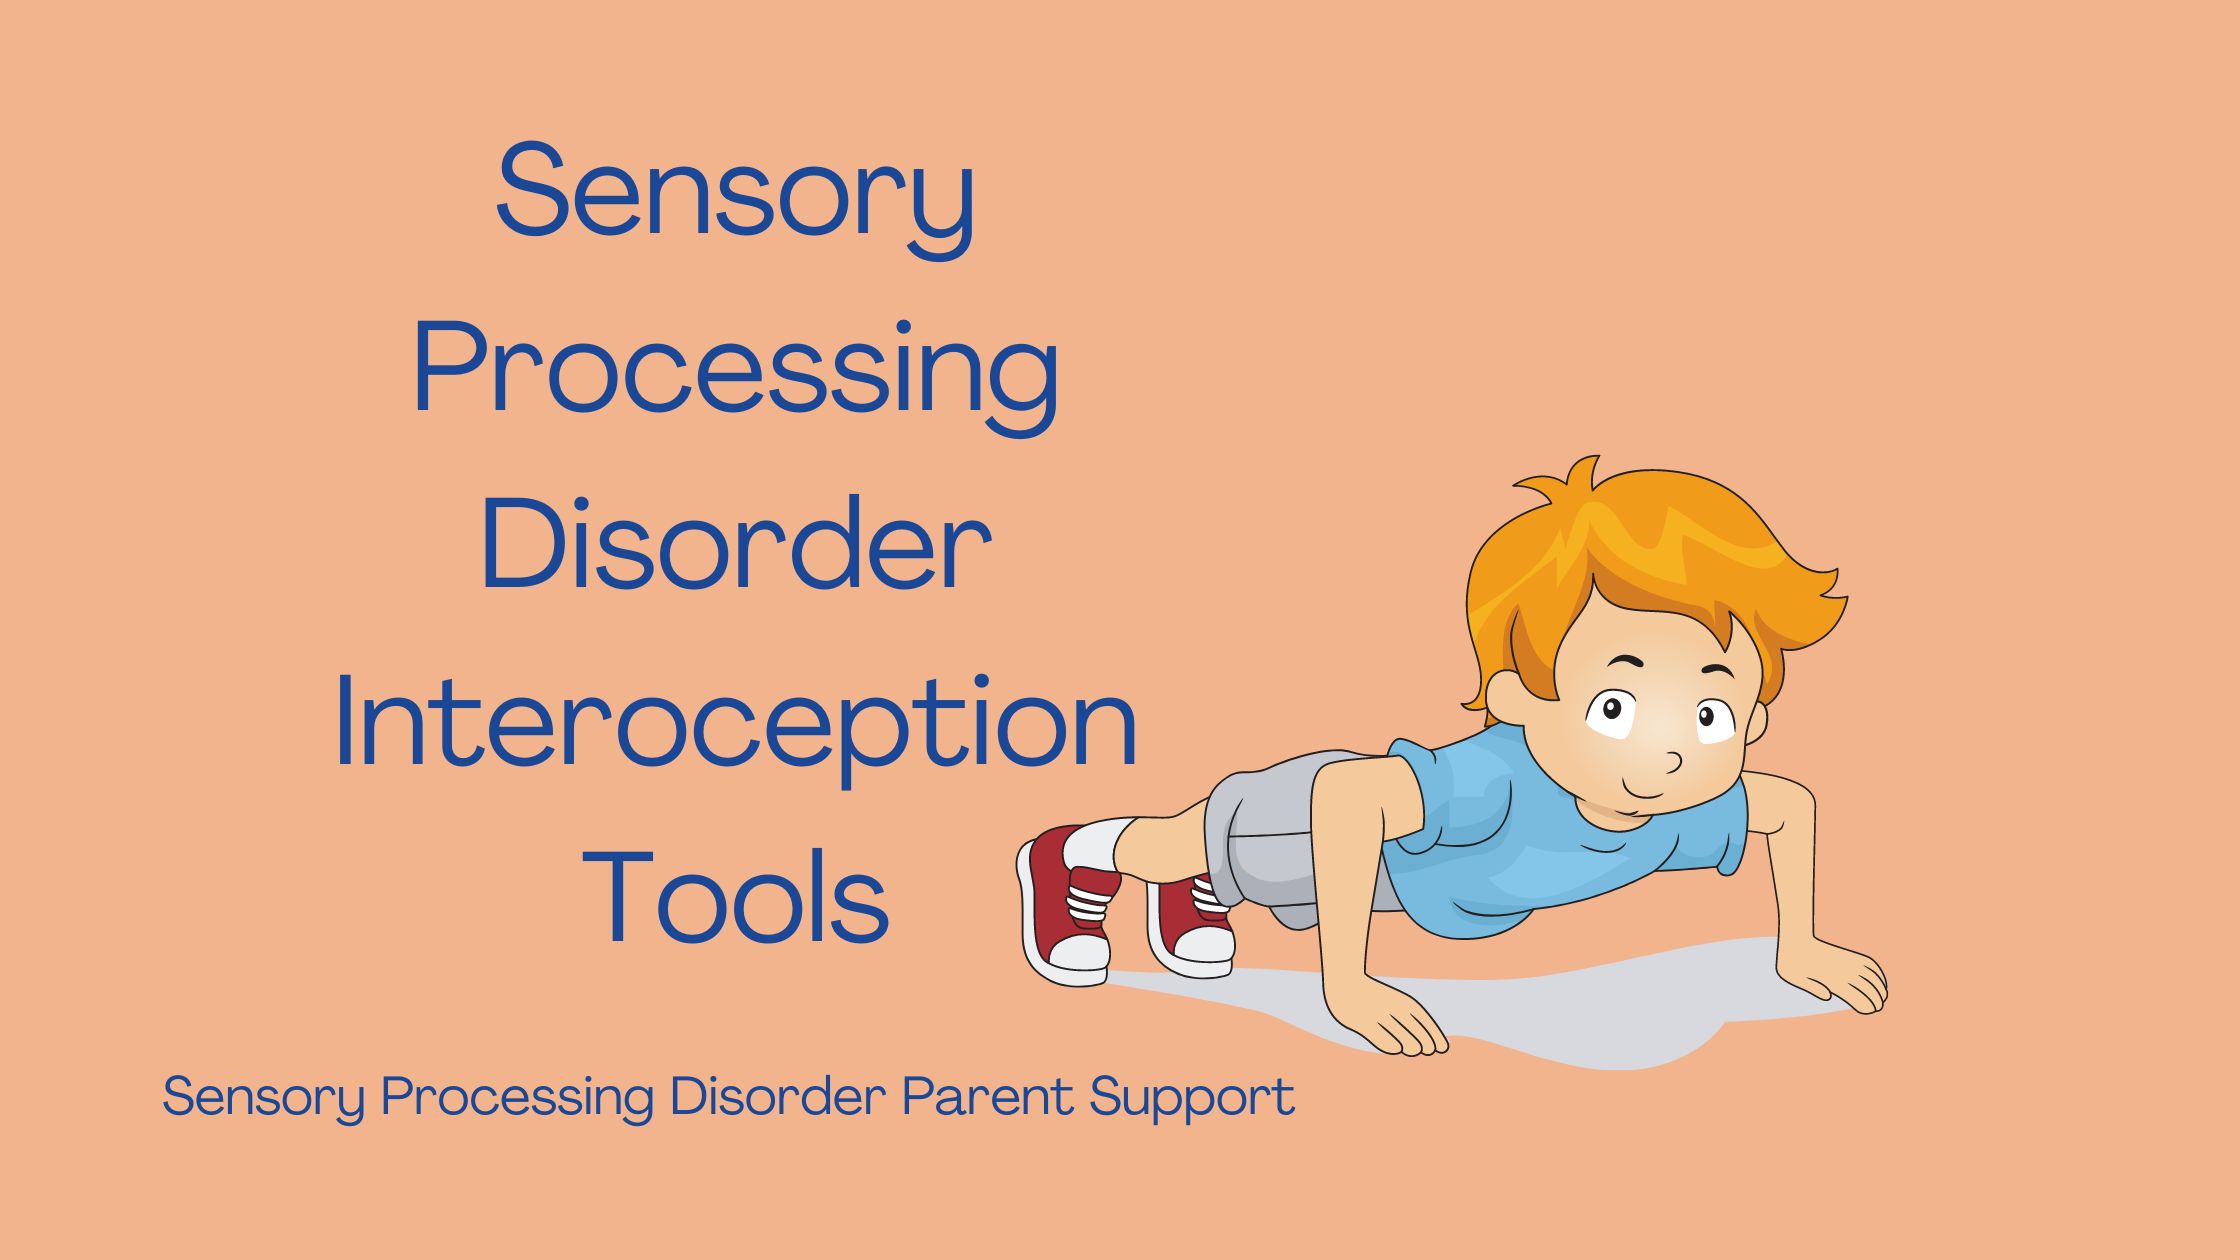 child with sensory processing disorder doing sit ups and exercising Sensory Processing Disorder Interoception Tools For Children